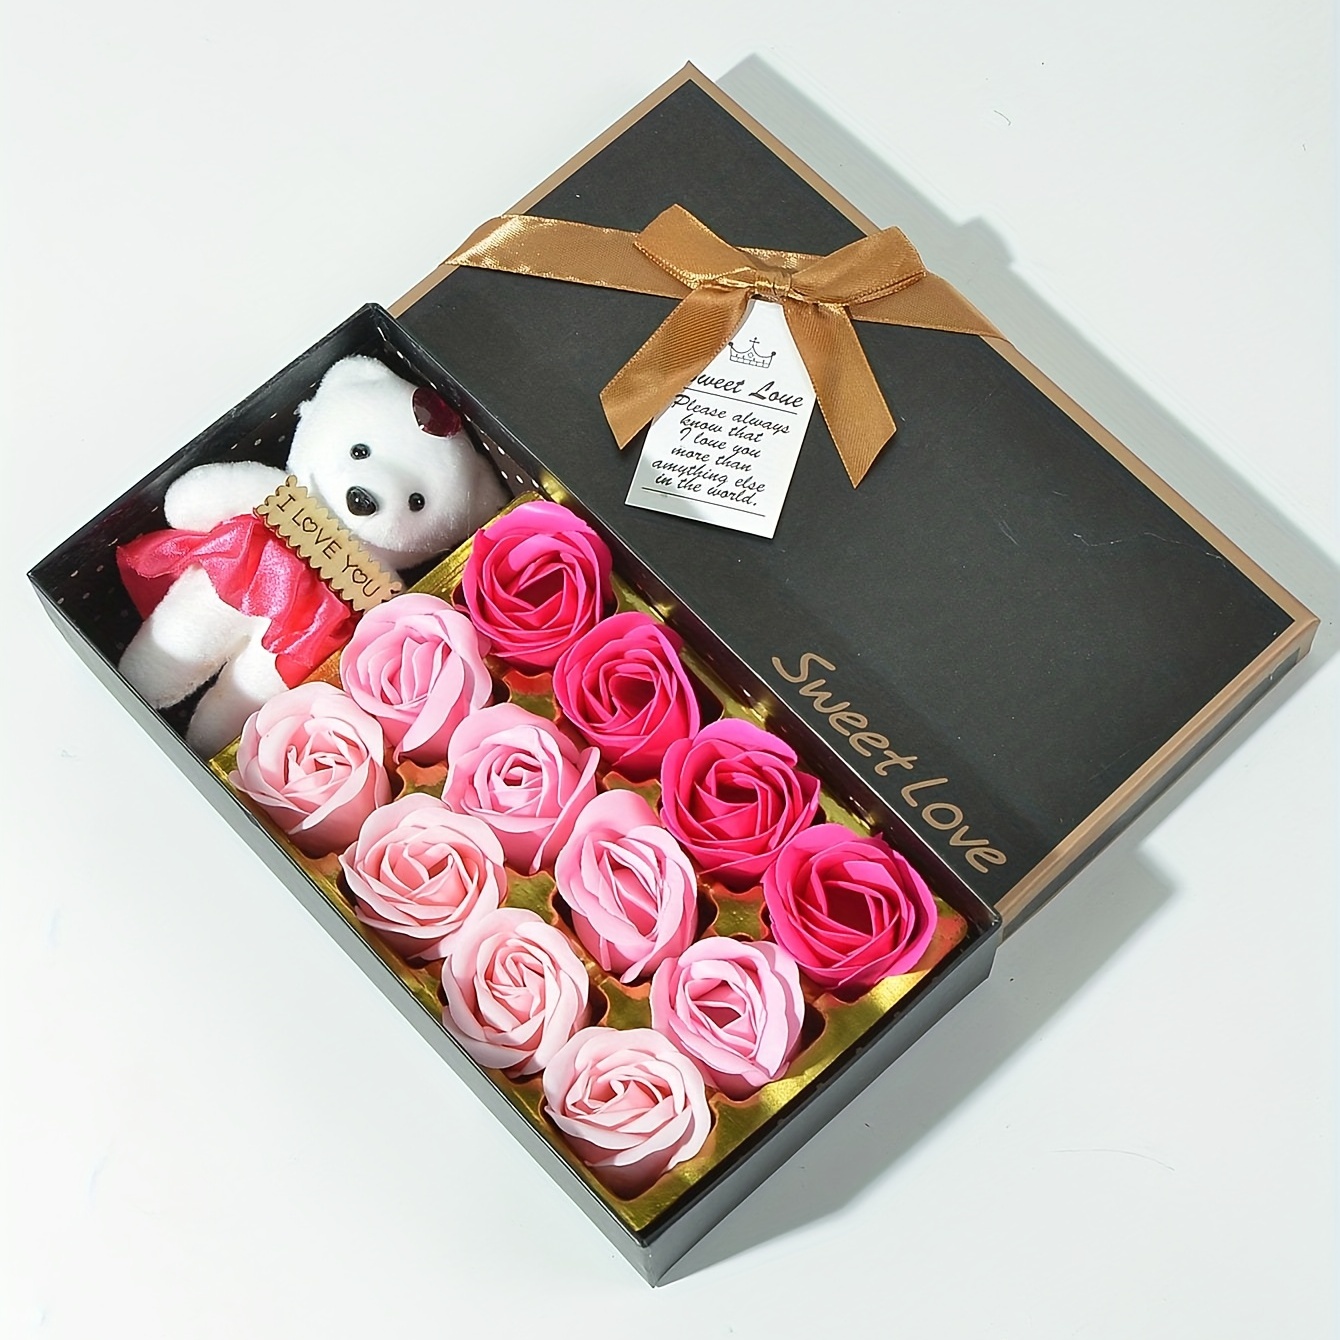 I LOVE YOU BOX - Flowers and chocolate (SOLD OUT)